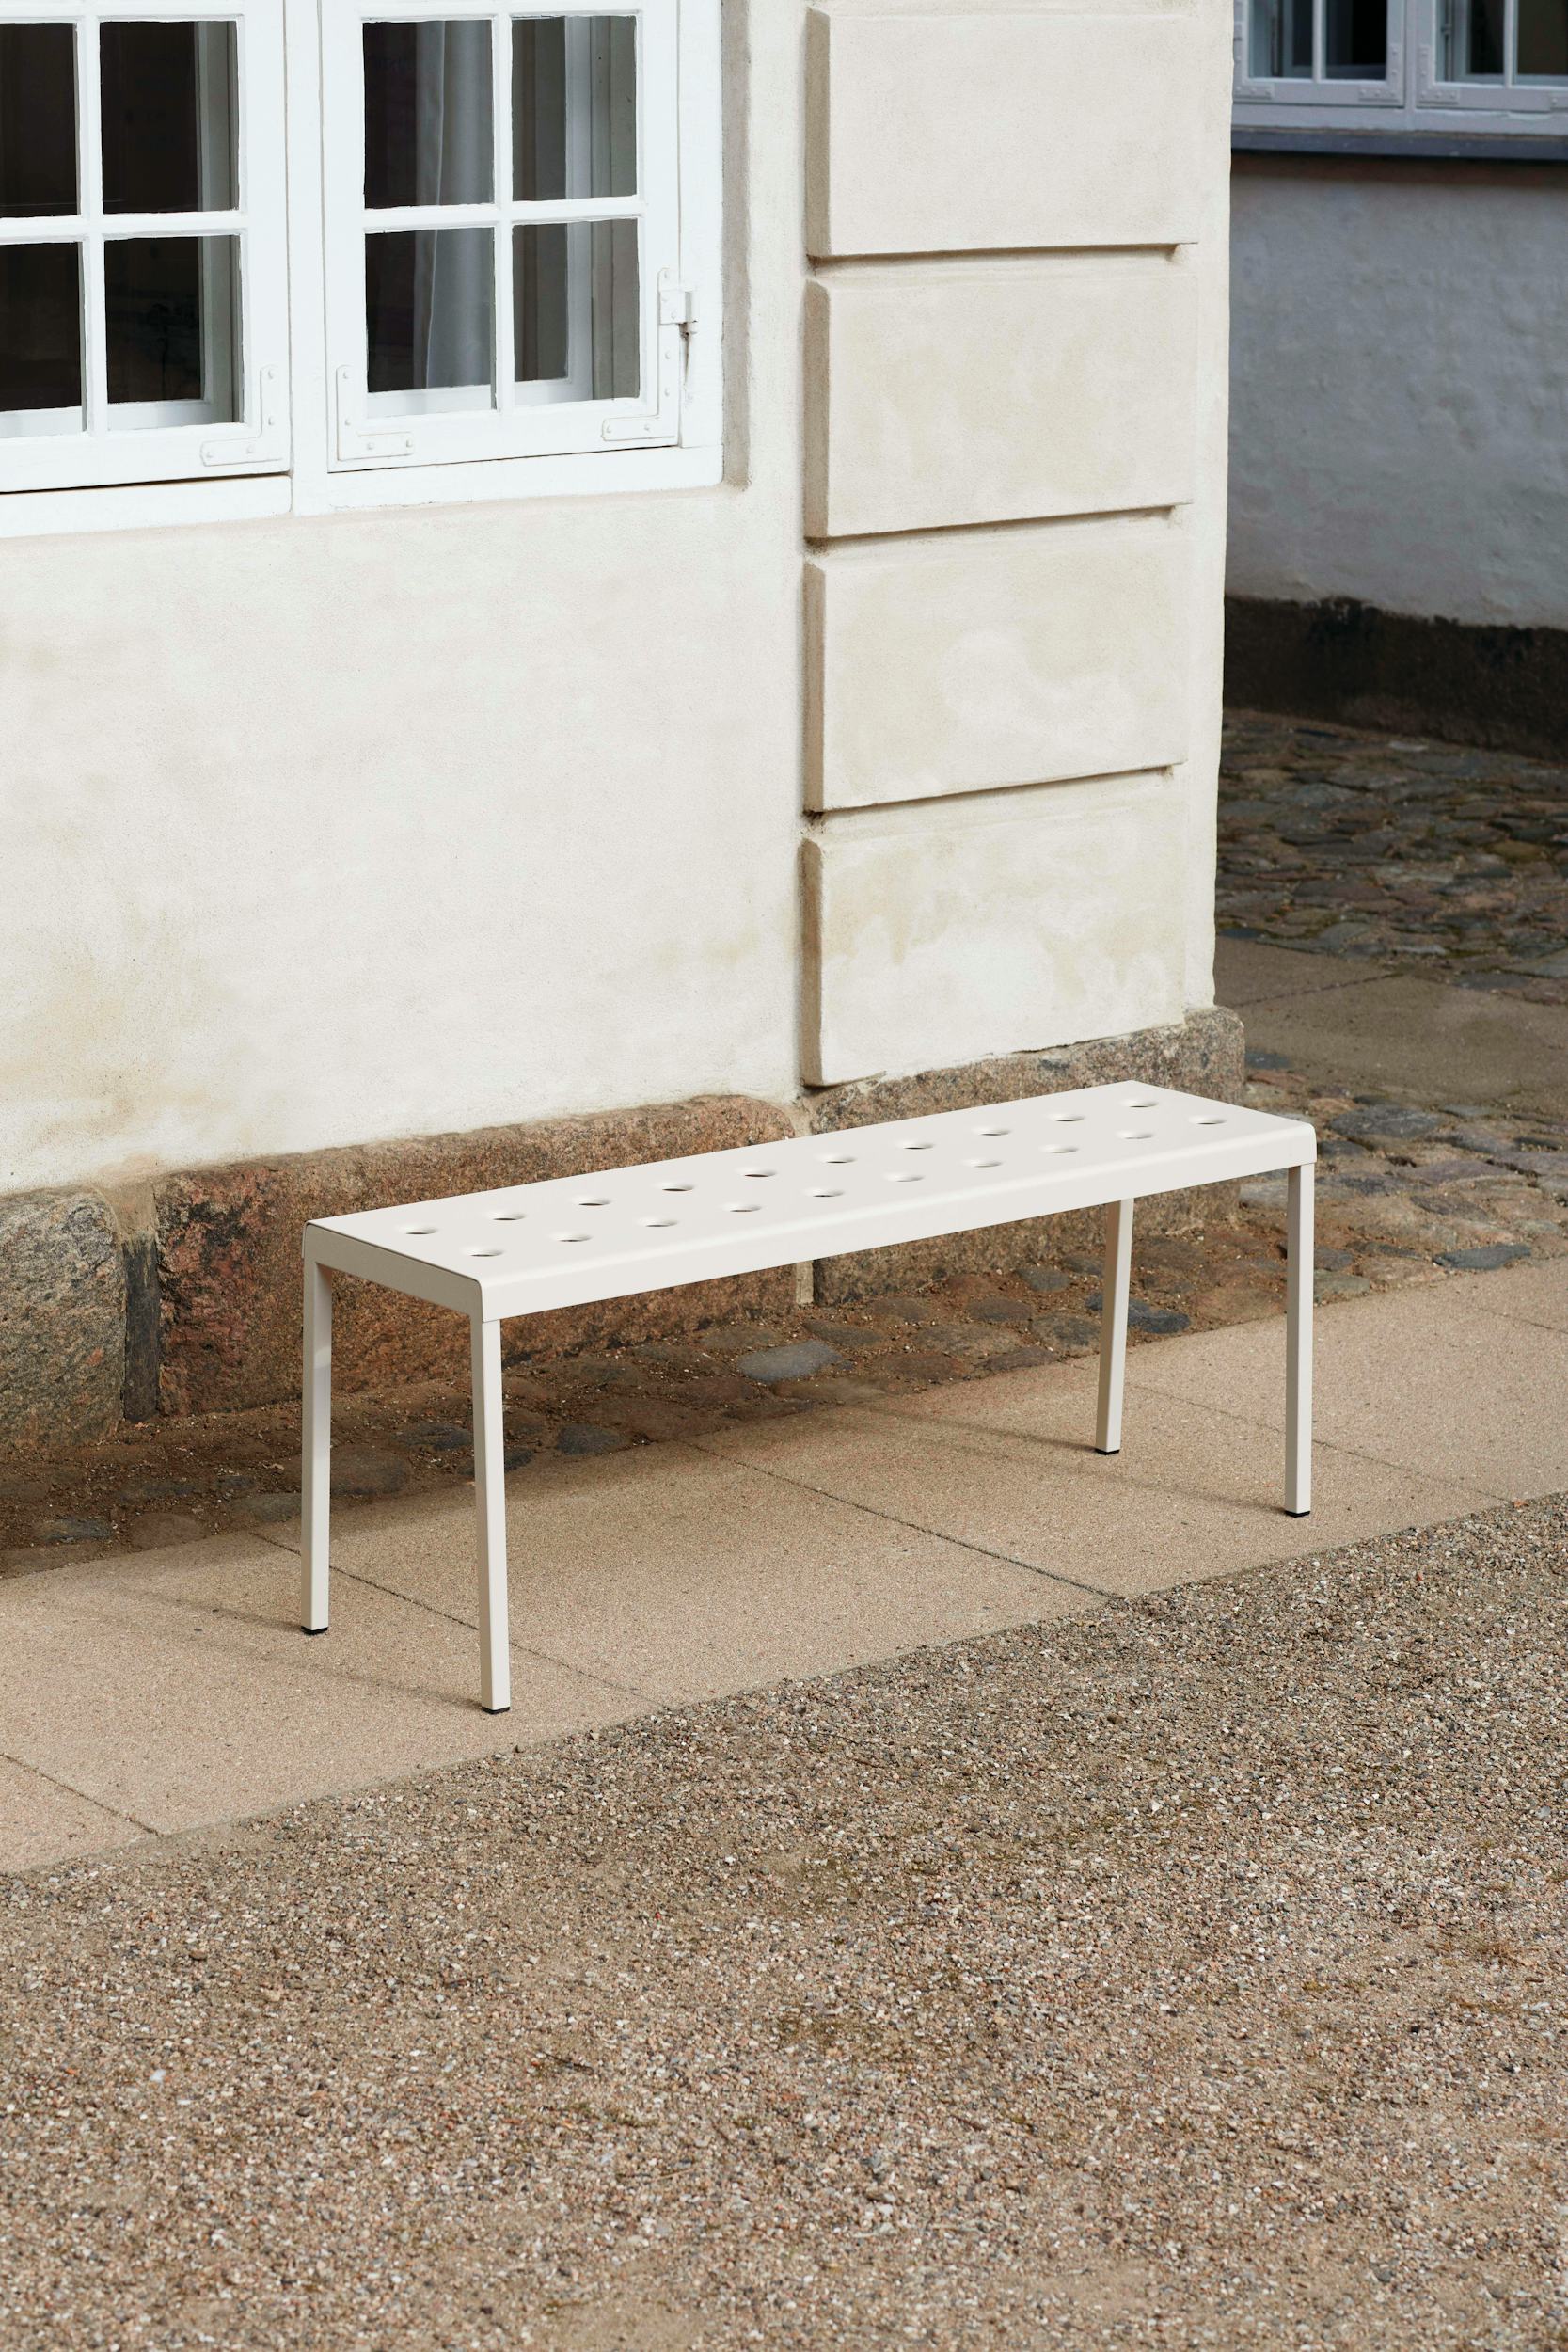 Balcony Backless Bench Design Within – Reach